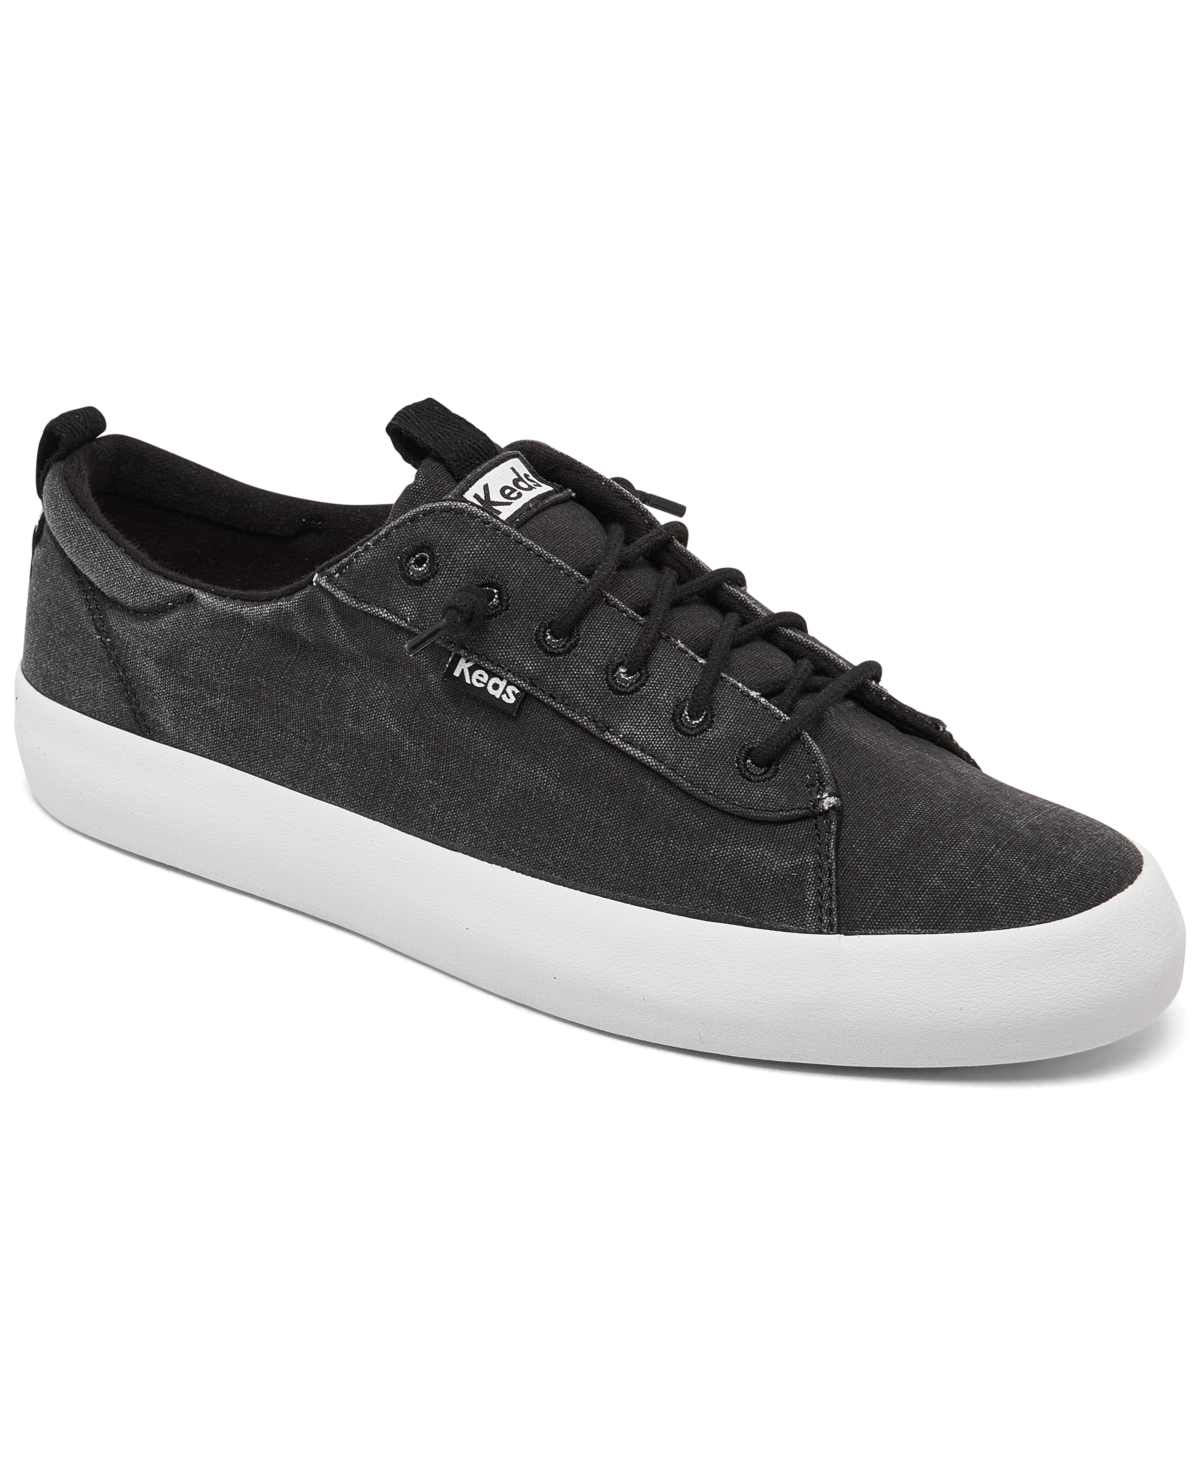 Women's Kickback Canvas Casual Sneakers from Finish Line - Black